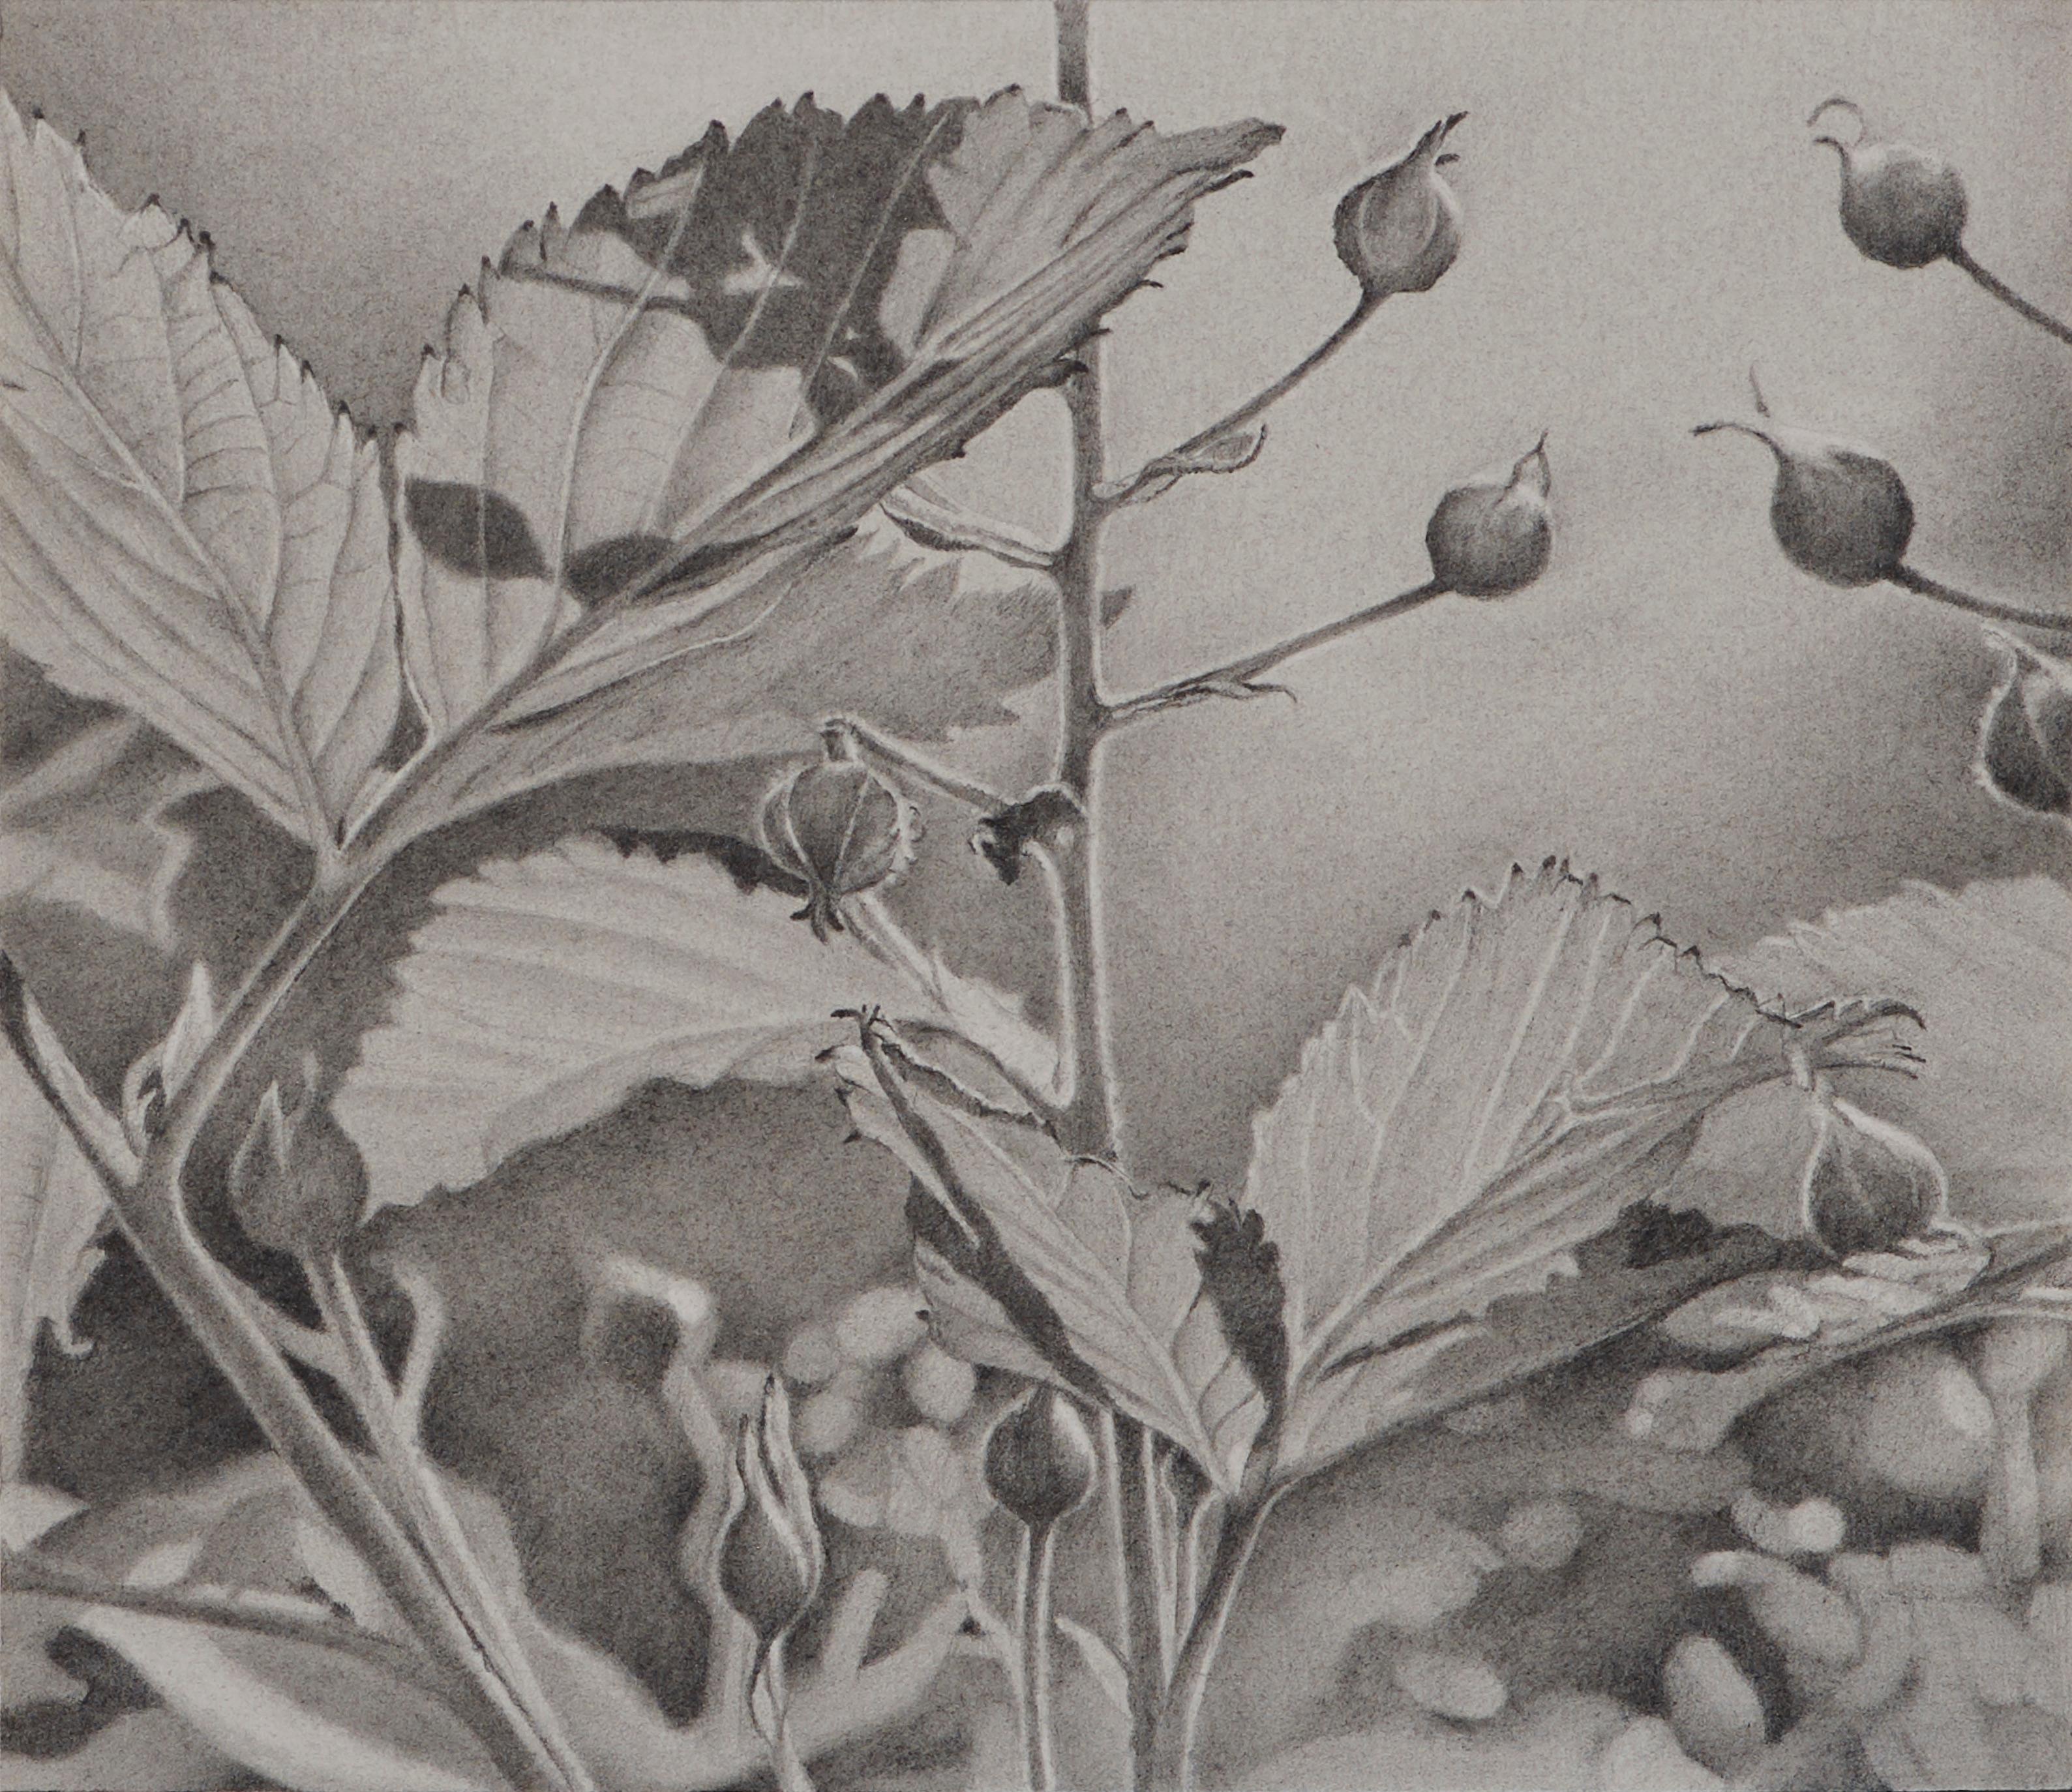 Mary Reilly Landscape Art - Buds and Leaves, photorealist graphite floral drawing, 2018